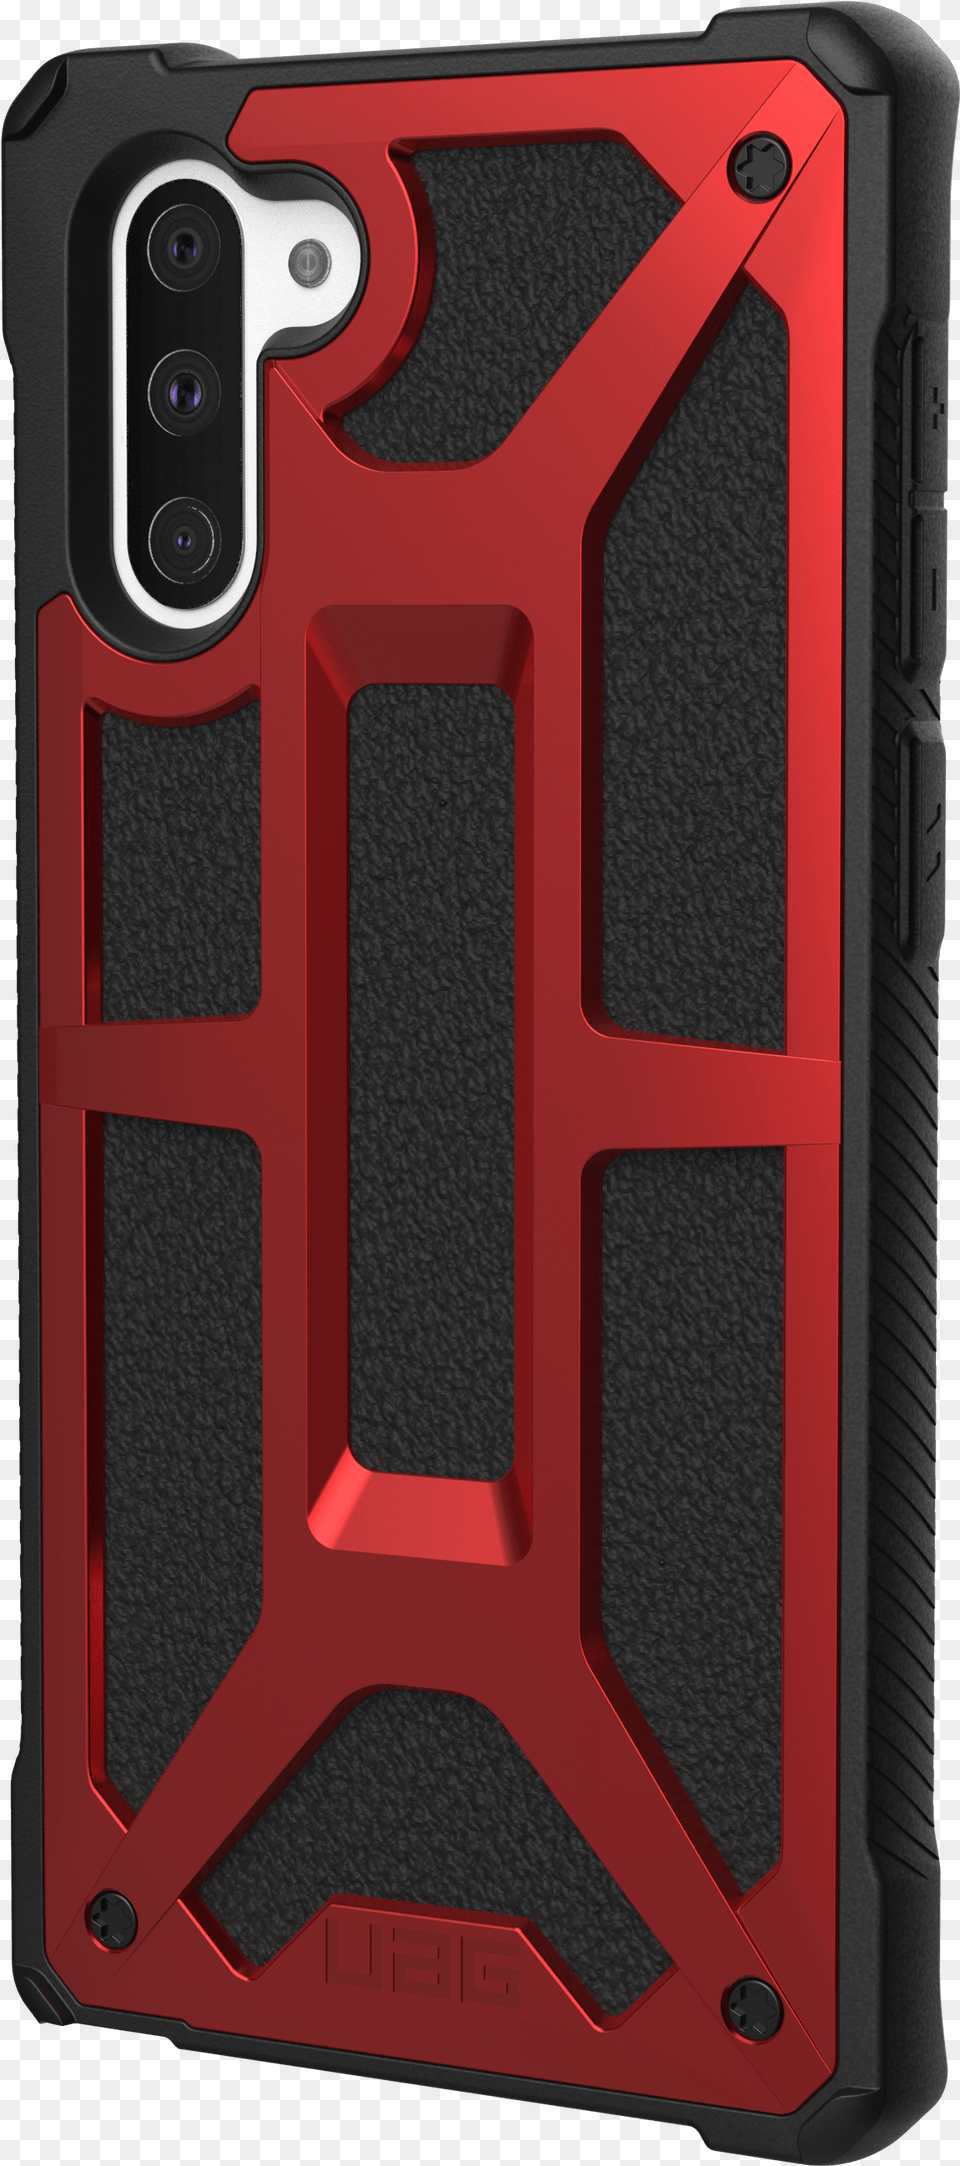 Uag Monarch Note, Electronics, Mobile Phone, Phone, Camera Free Png